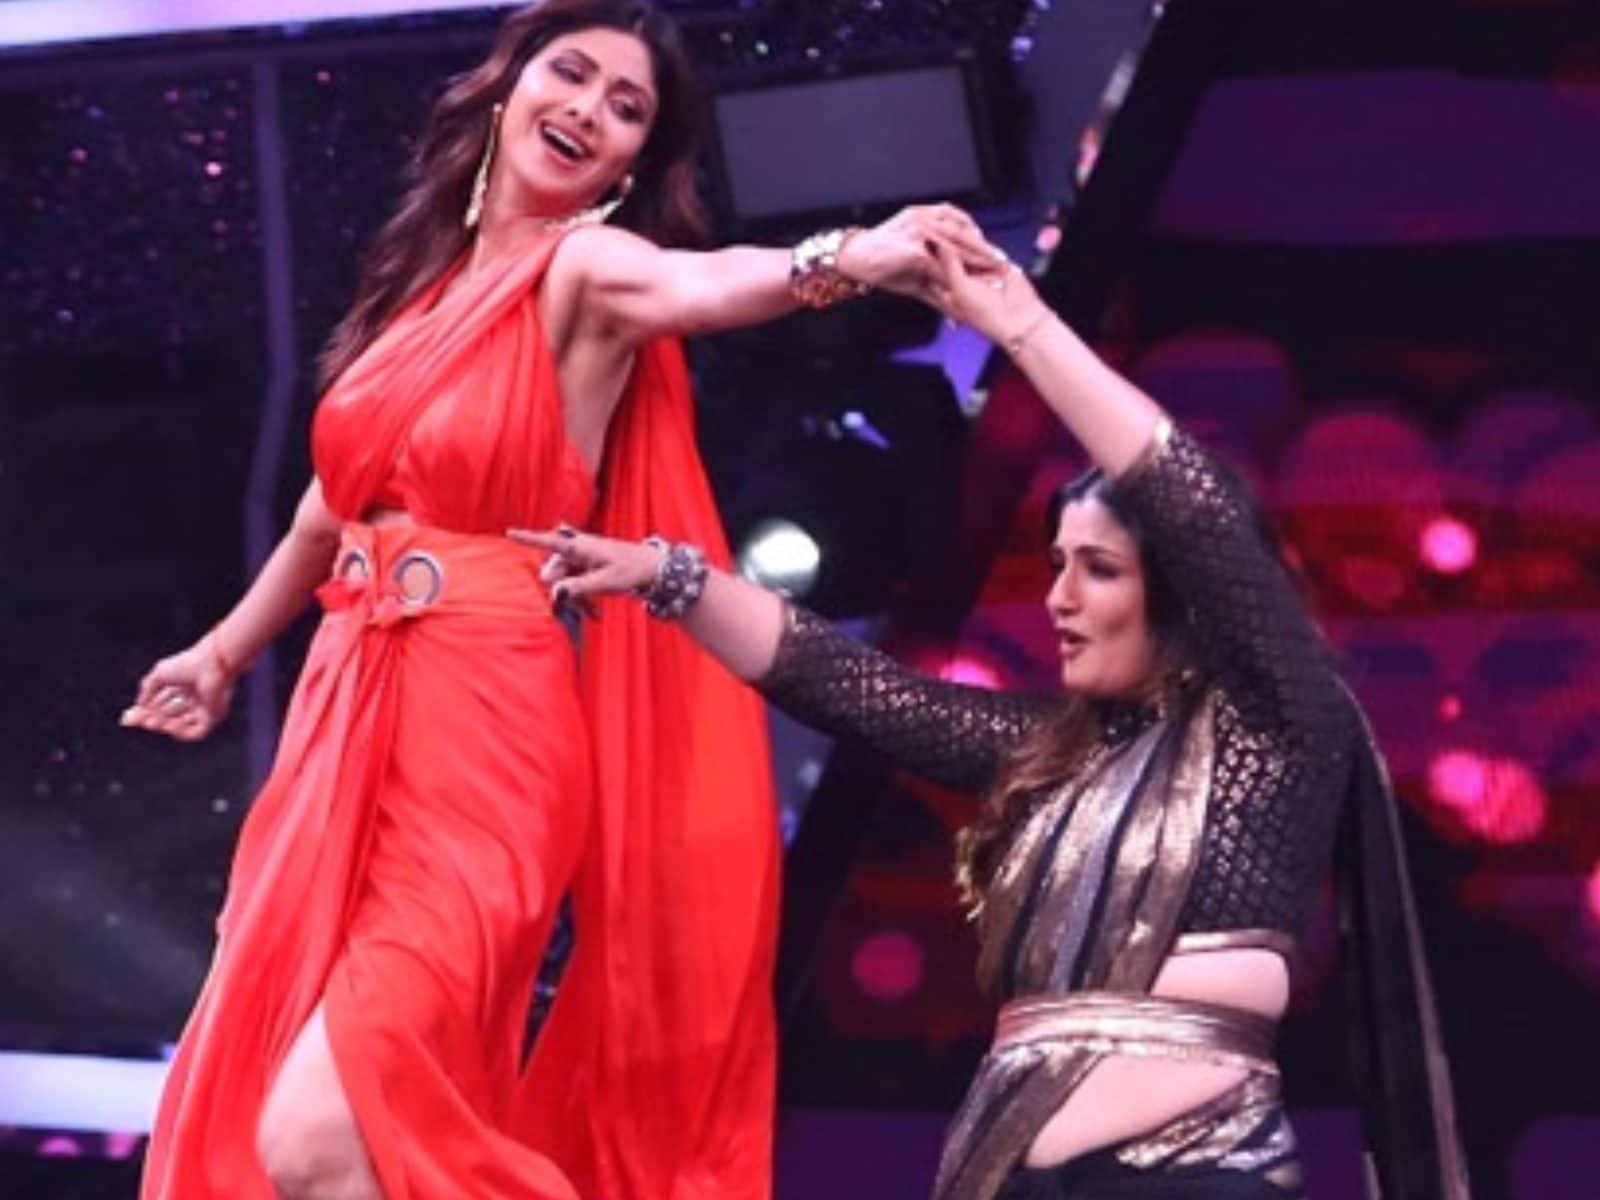 Raveena Tandon Holds Shilpa Shetty in Arms As They Groove to Chura Ke Dil  Mera on Super Dancer 4